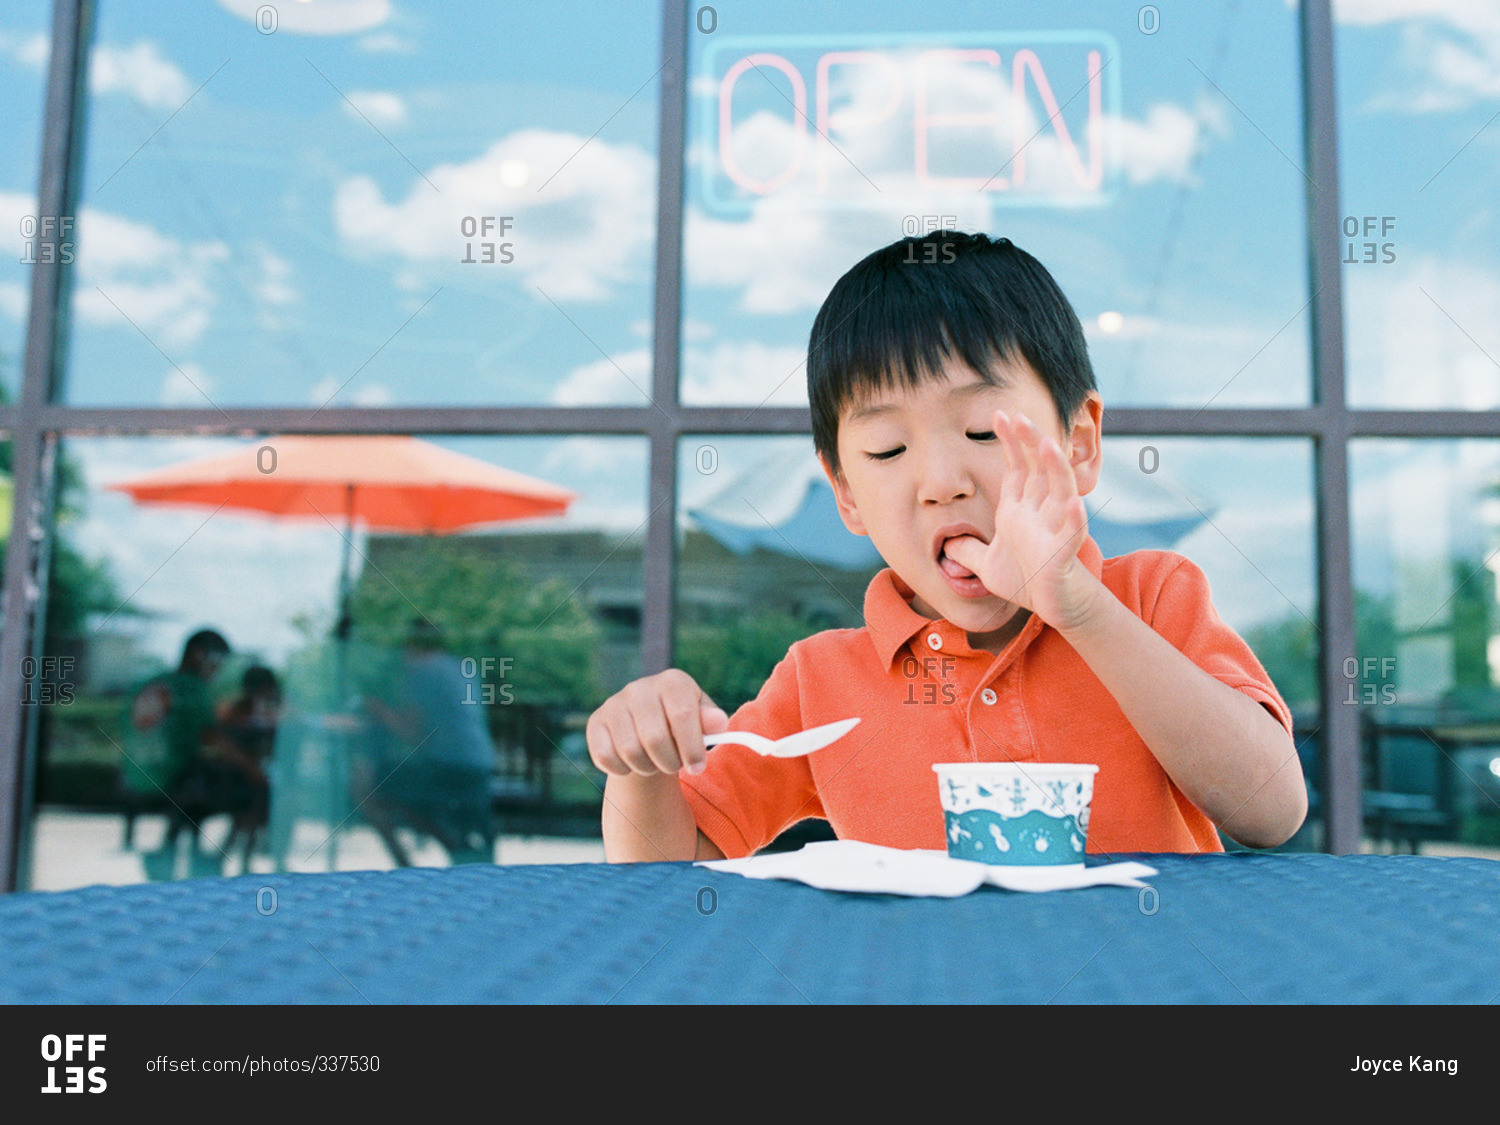 Little boy eating ice cream and licking his fingers